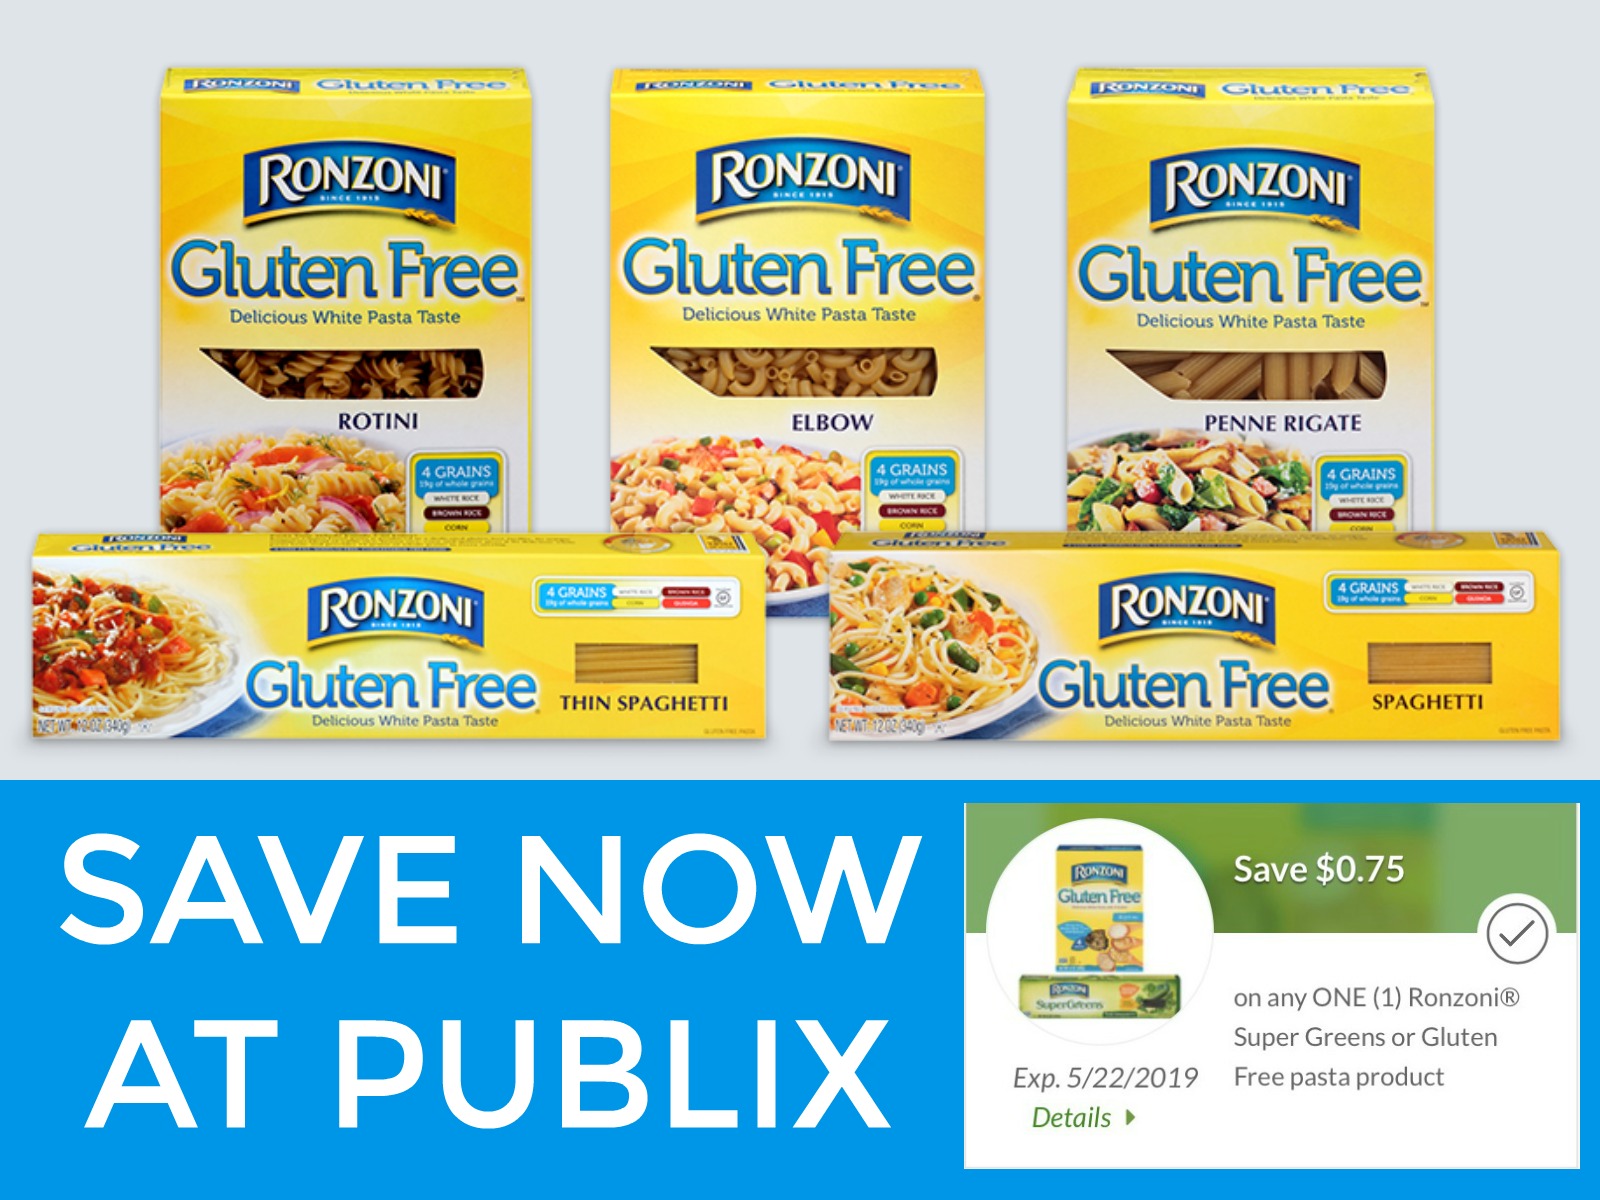 Get Savings On Ronzoni® Gluten Free Pasta At Your Local Publix - Load Your Coupon! on I Heart Publix